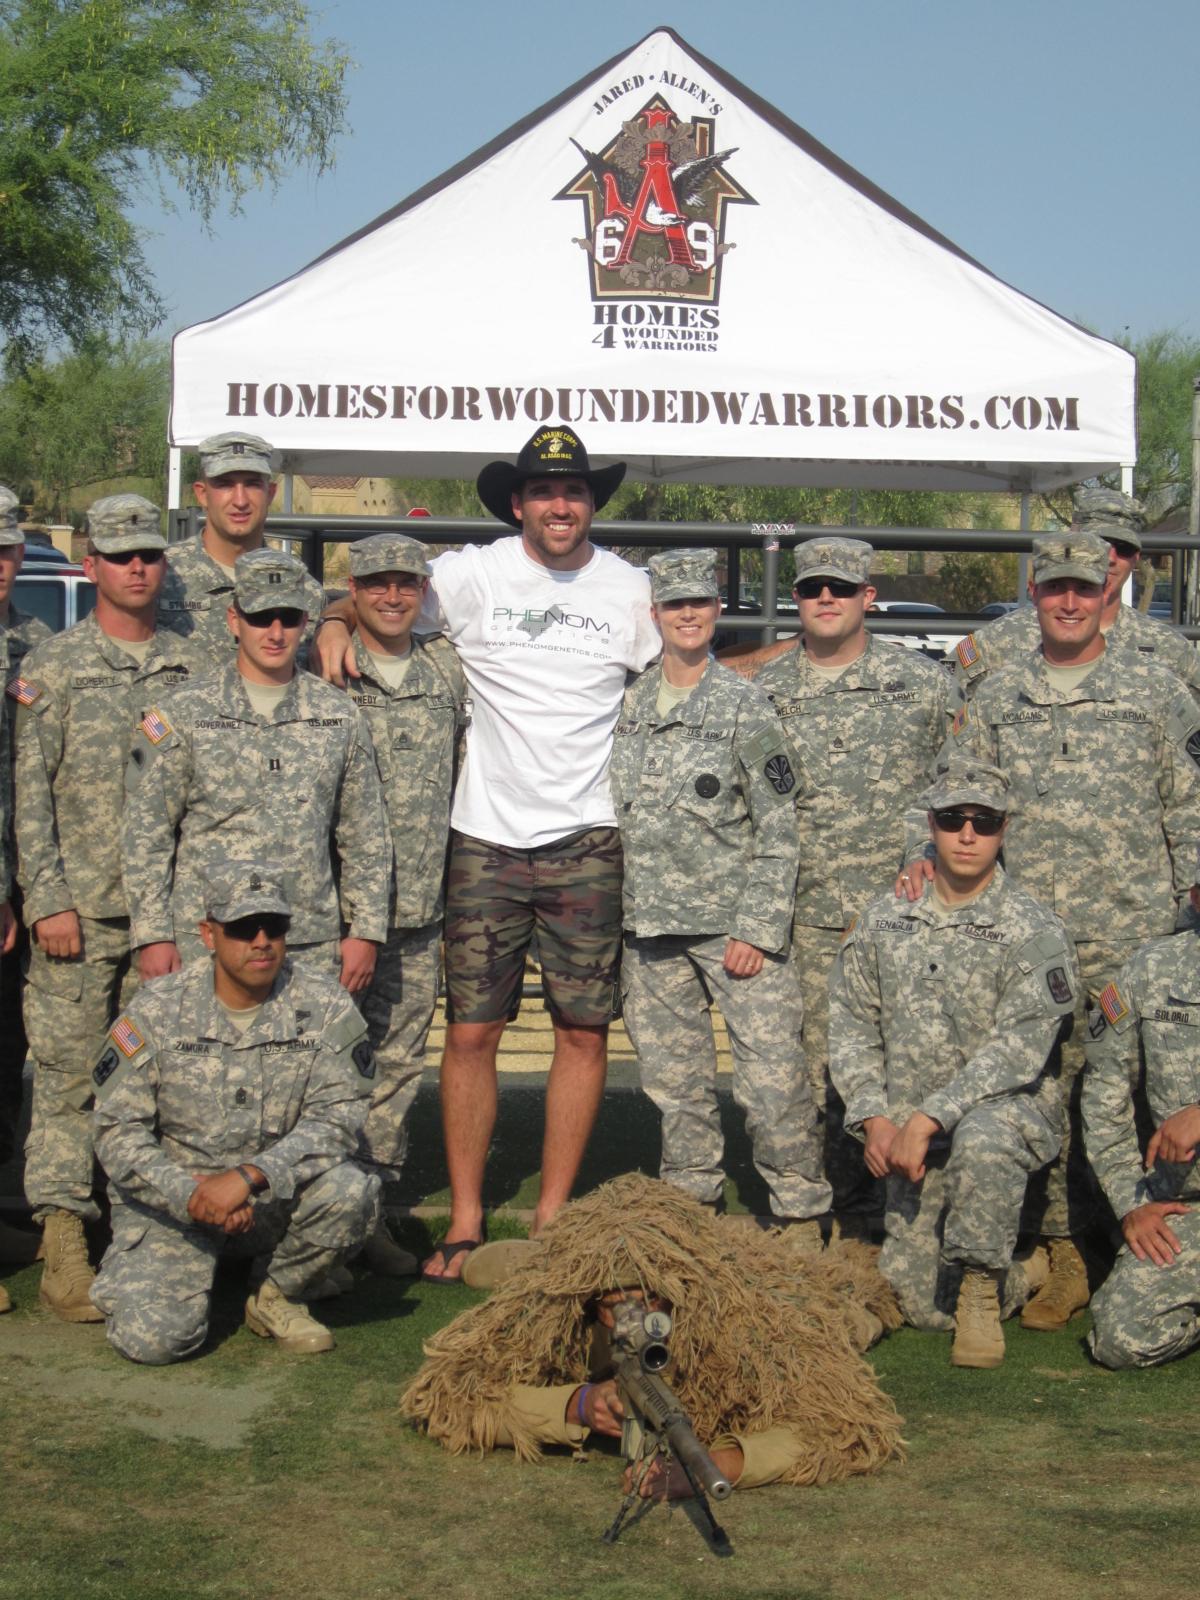  Former NFL player Jared Allen meets with Army soldiers during an event for his charity organization. (UNrestricted MKTG)